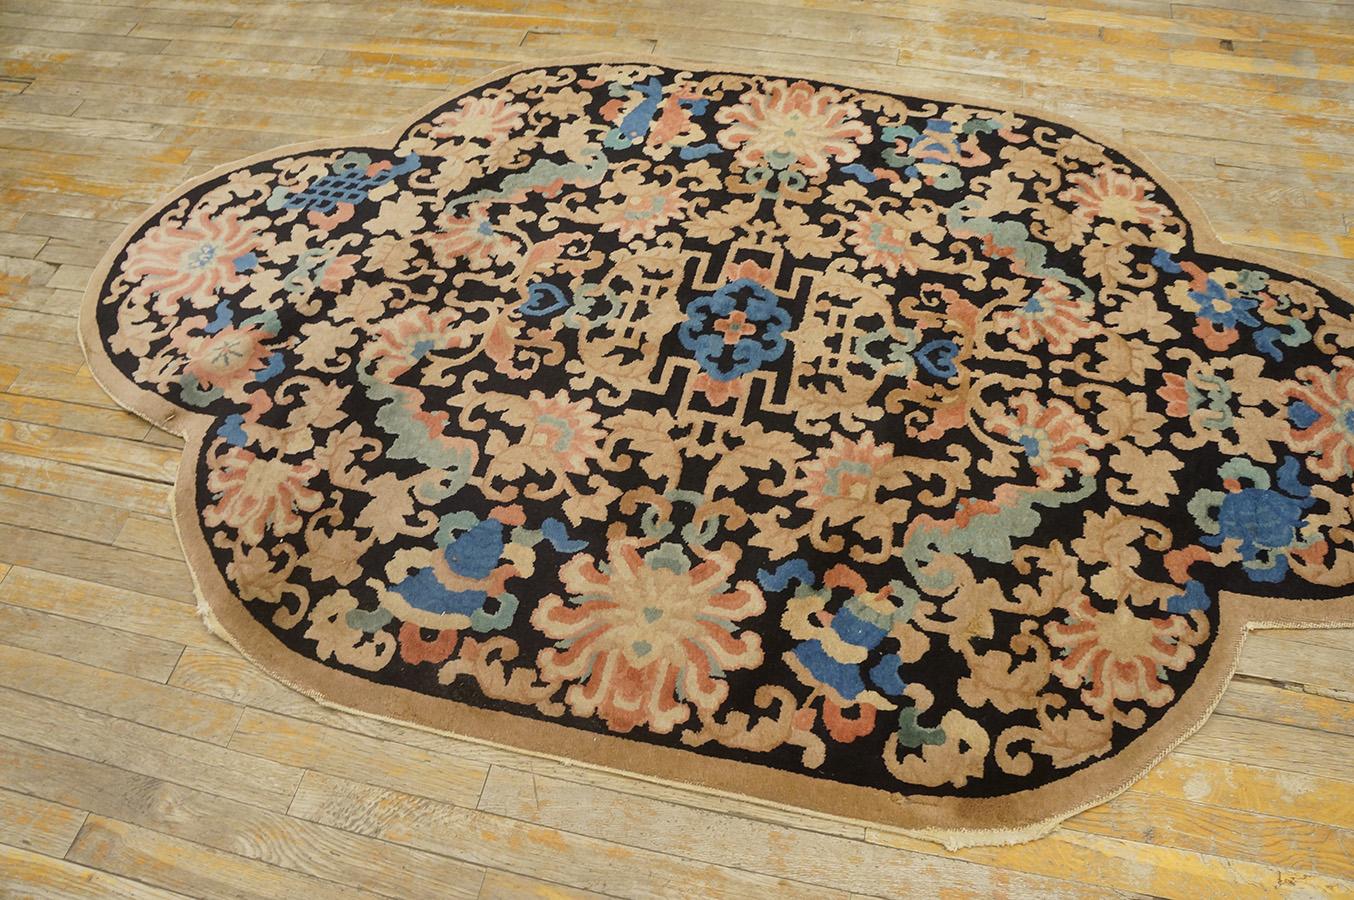 Early 20th Century 1920s Chinese Art Deco Carpet by Fetti - Li Workshop (4' 6''x 7' 6''-137 x 228) For Sale